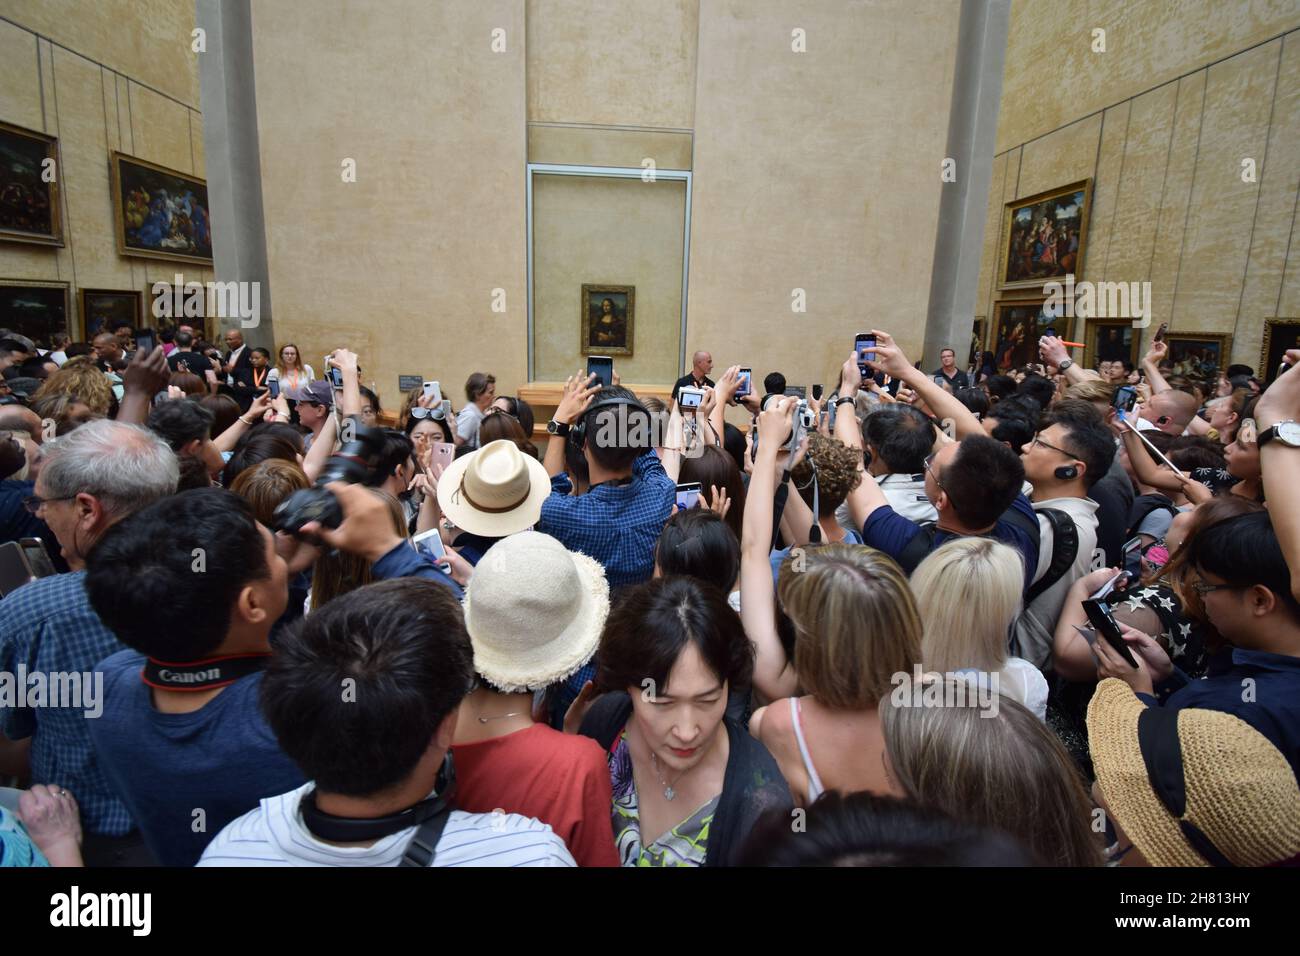 Monalisa crowd at the Louvre Stock Photo